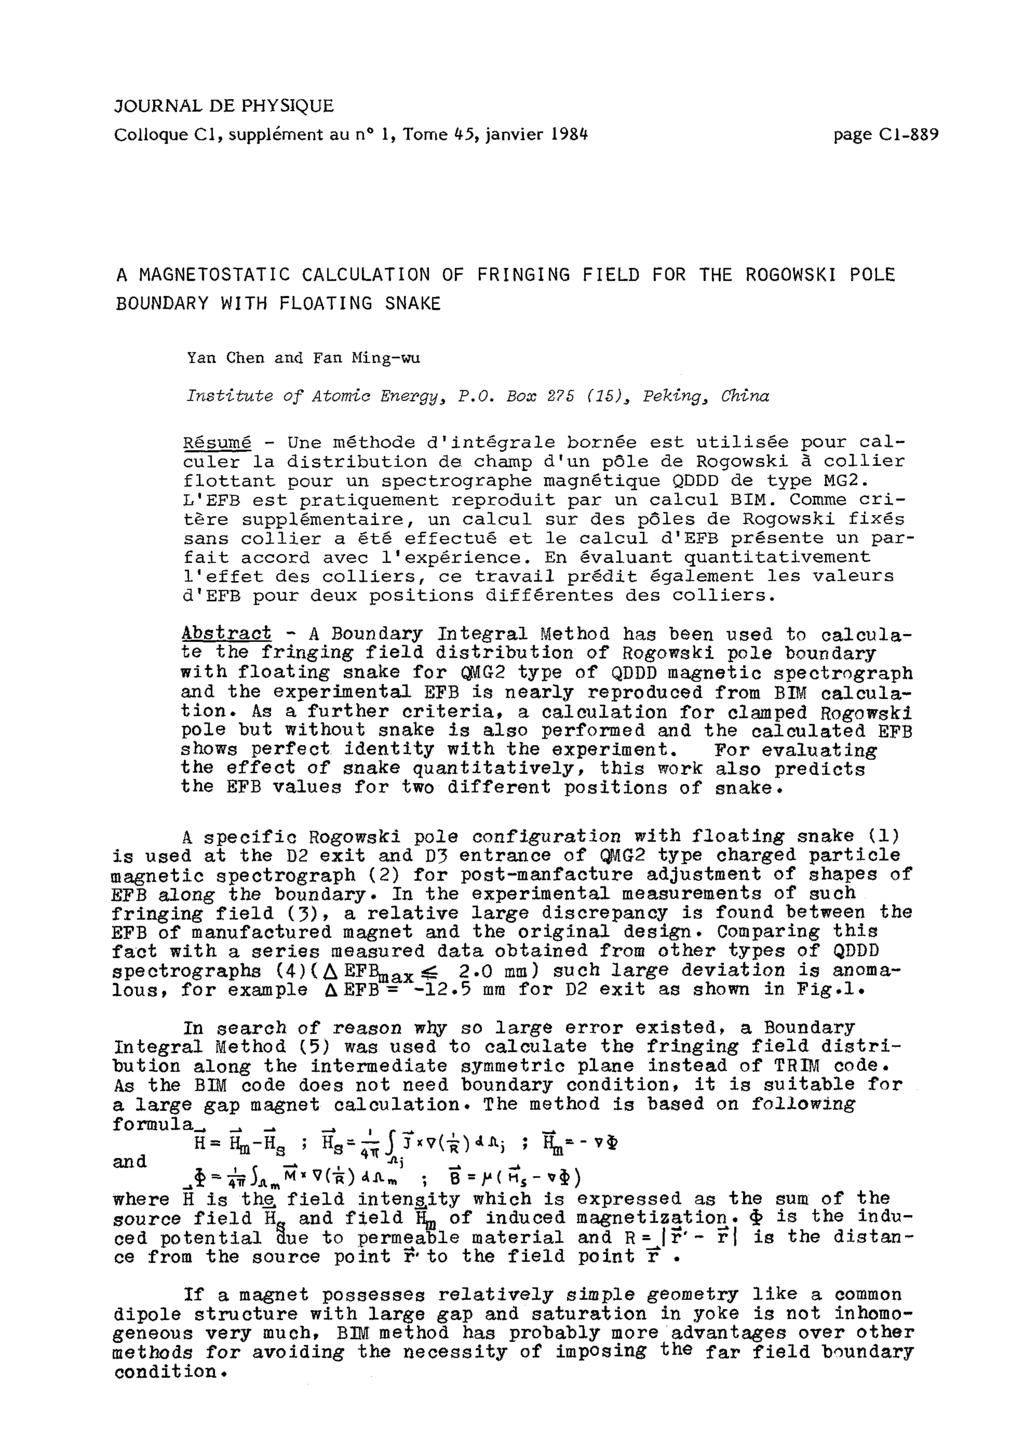 JOURNAL DE PHYSIQUE Colloque C1, suppl6ment au no 1, Tome 45, janvier 1984 page Cl-889 A MAGNETOSTATIC CALCULATION OF FRINGING FIELD FOR THE ROGOWSKI POLE BOUNDARY WITH FLOAT1 NG SNAKE Yan Chen and